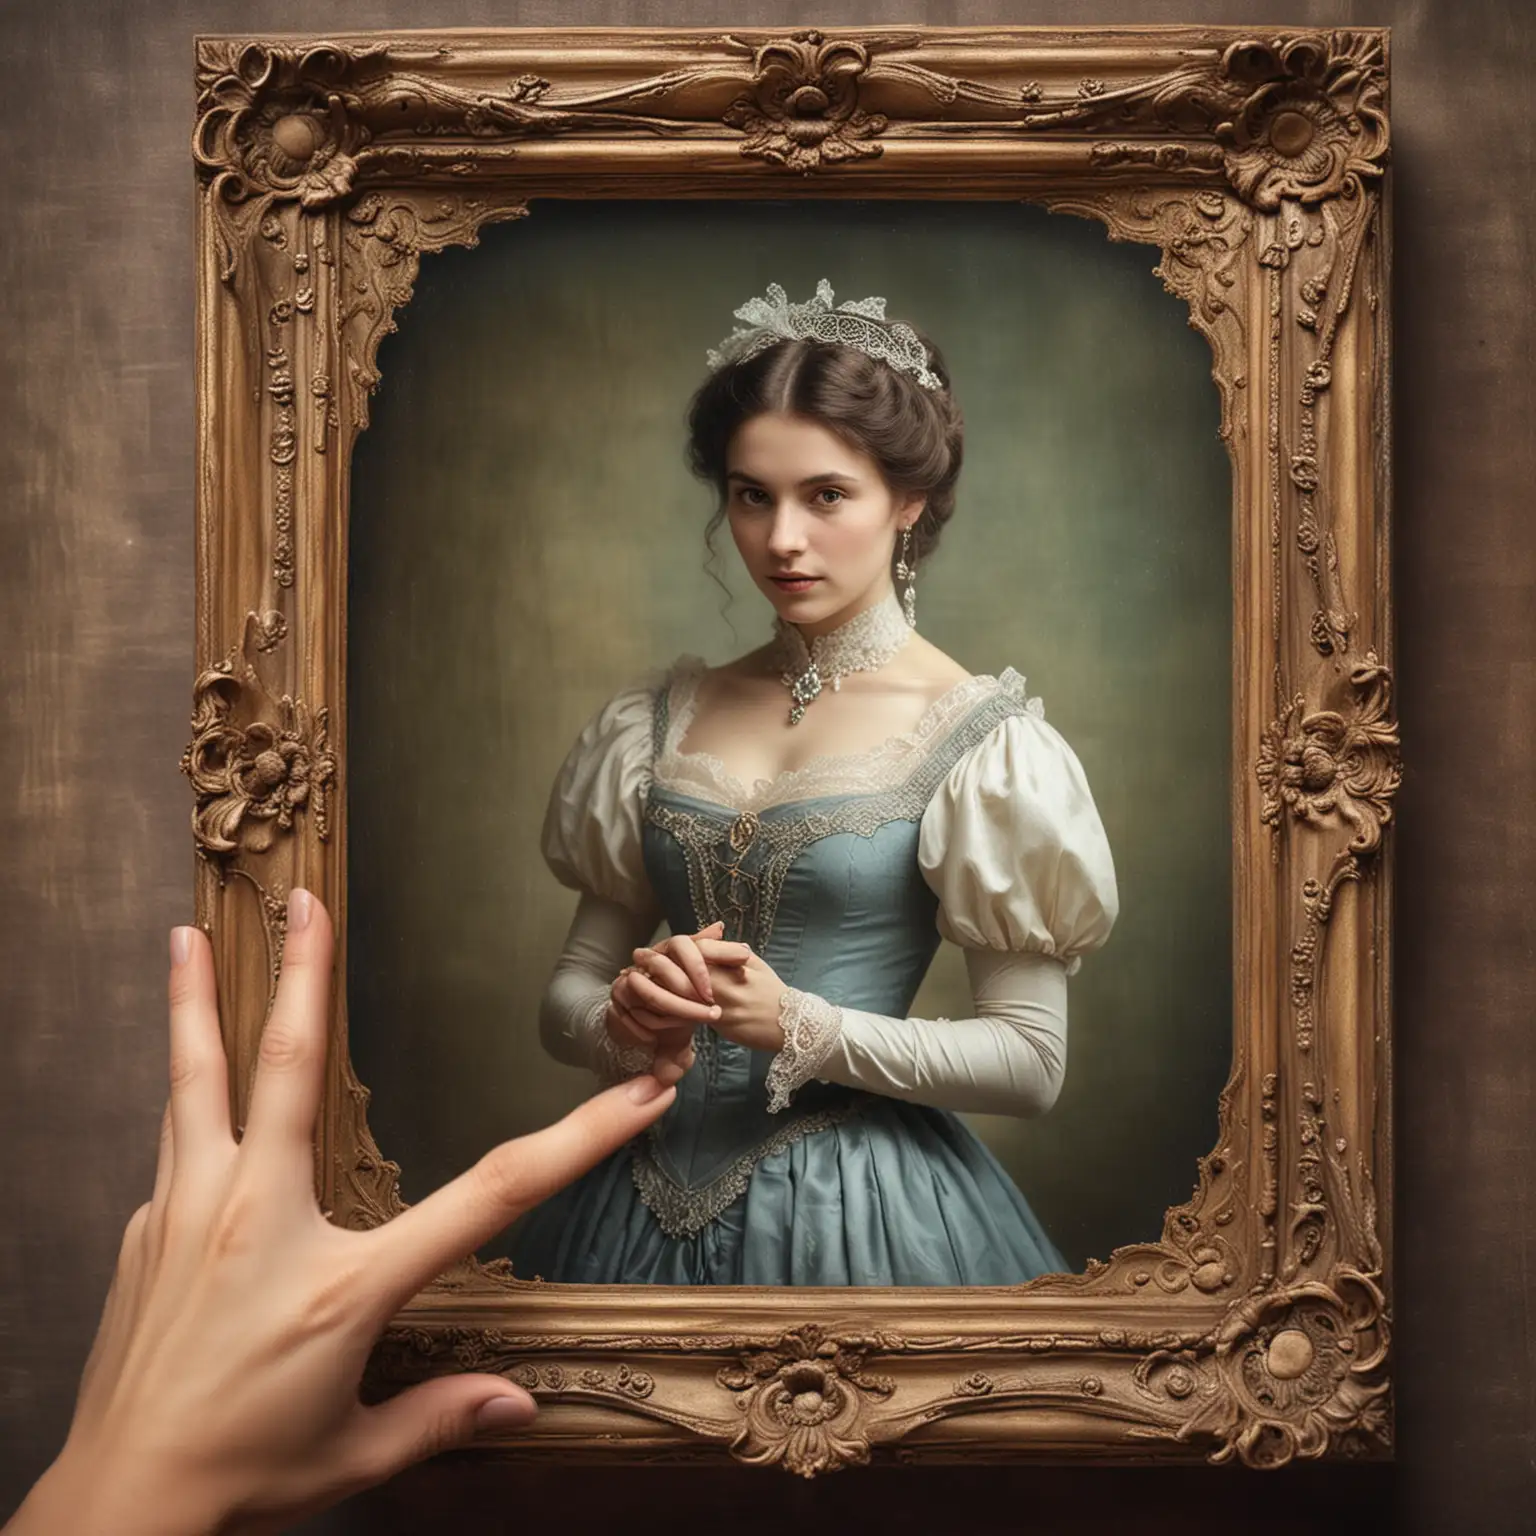 Magical Portal to the Victorian Era Delicate Hands Holding an Old Photograph